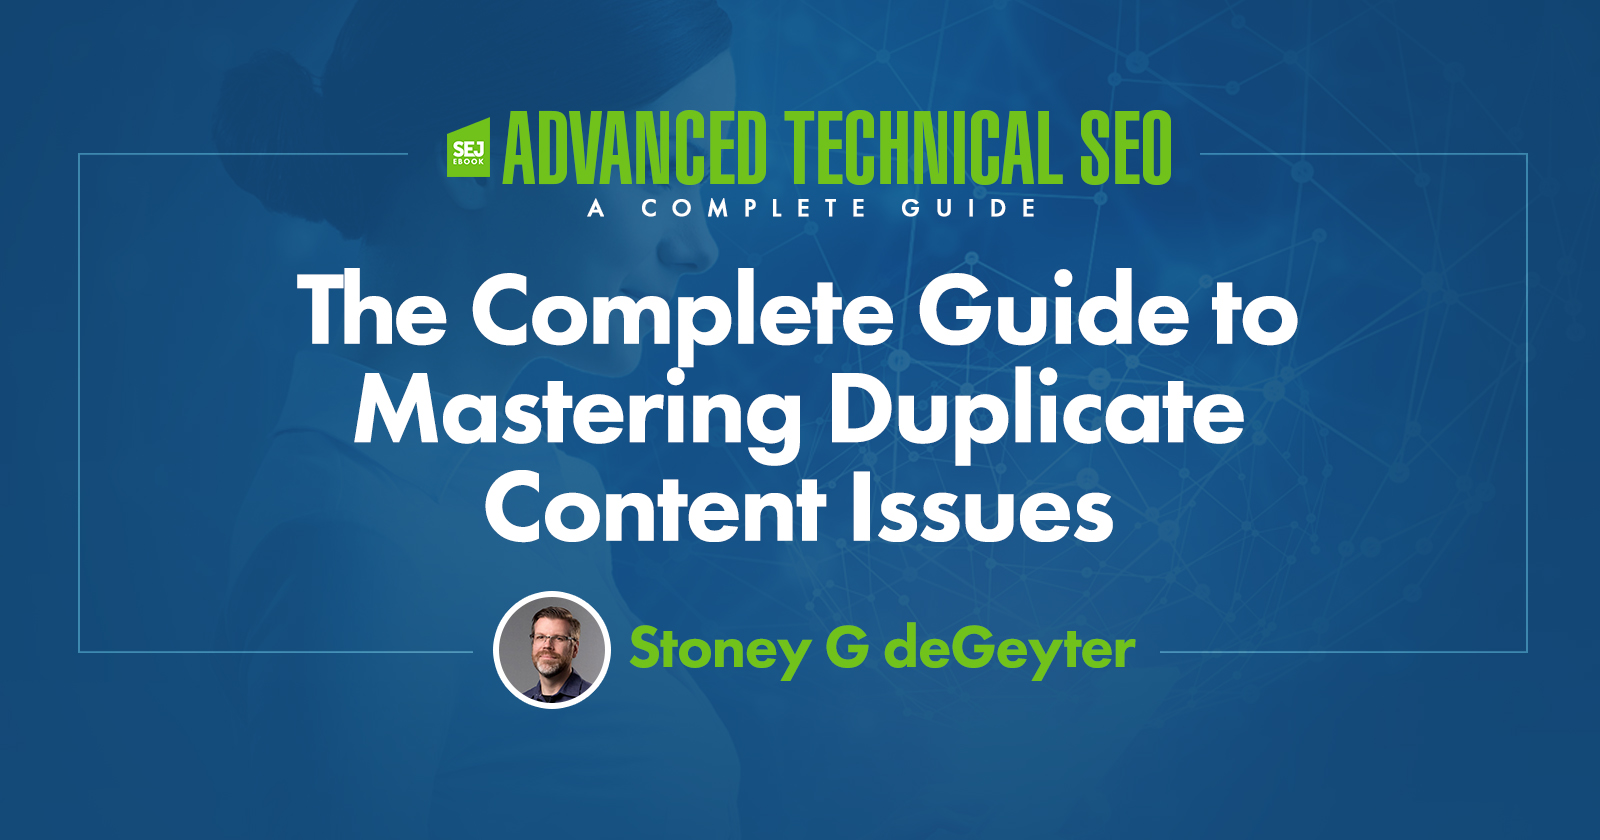 The Complete Guide to Mastering Duplicate Content Issues